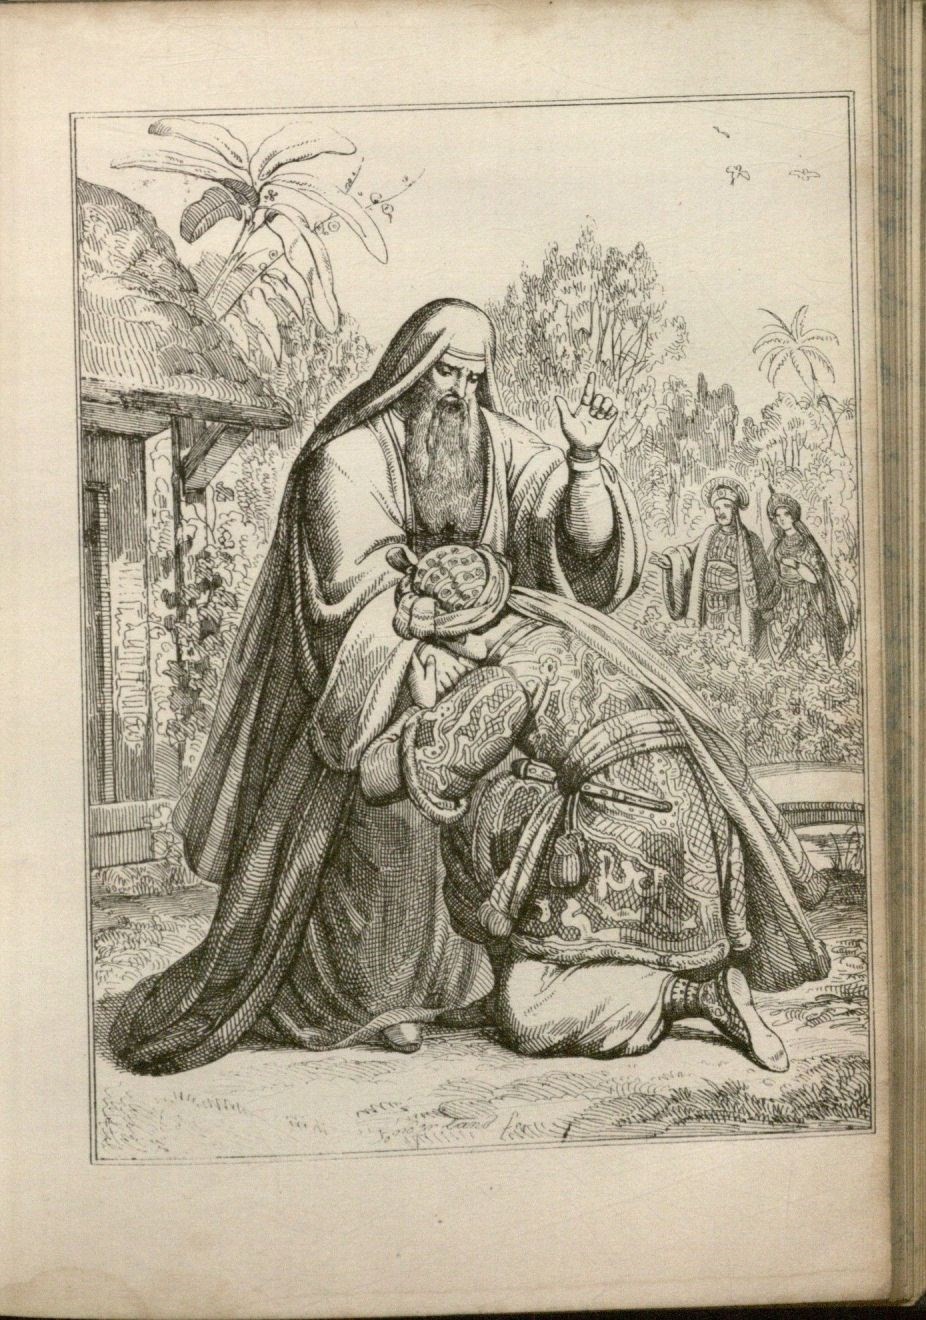 Illustration from "The Three Trials" in Tales from the Eastern-Land